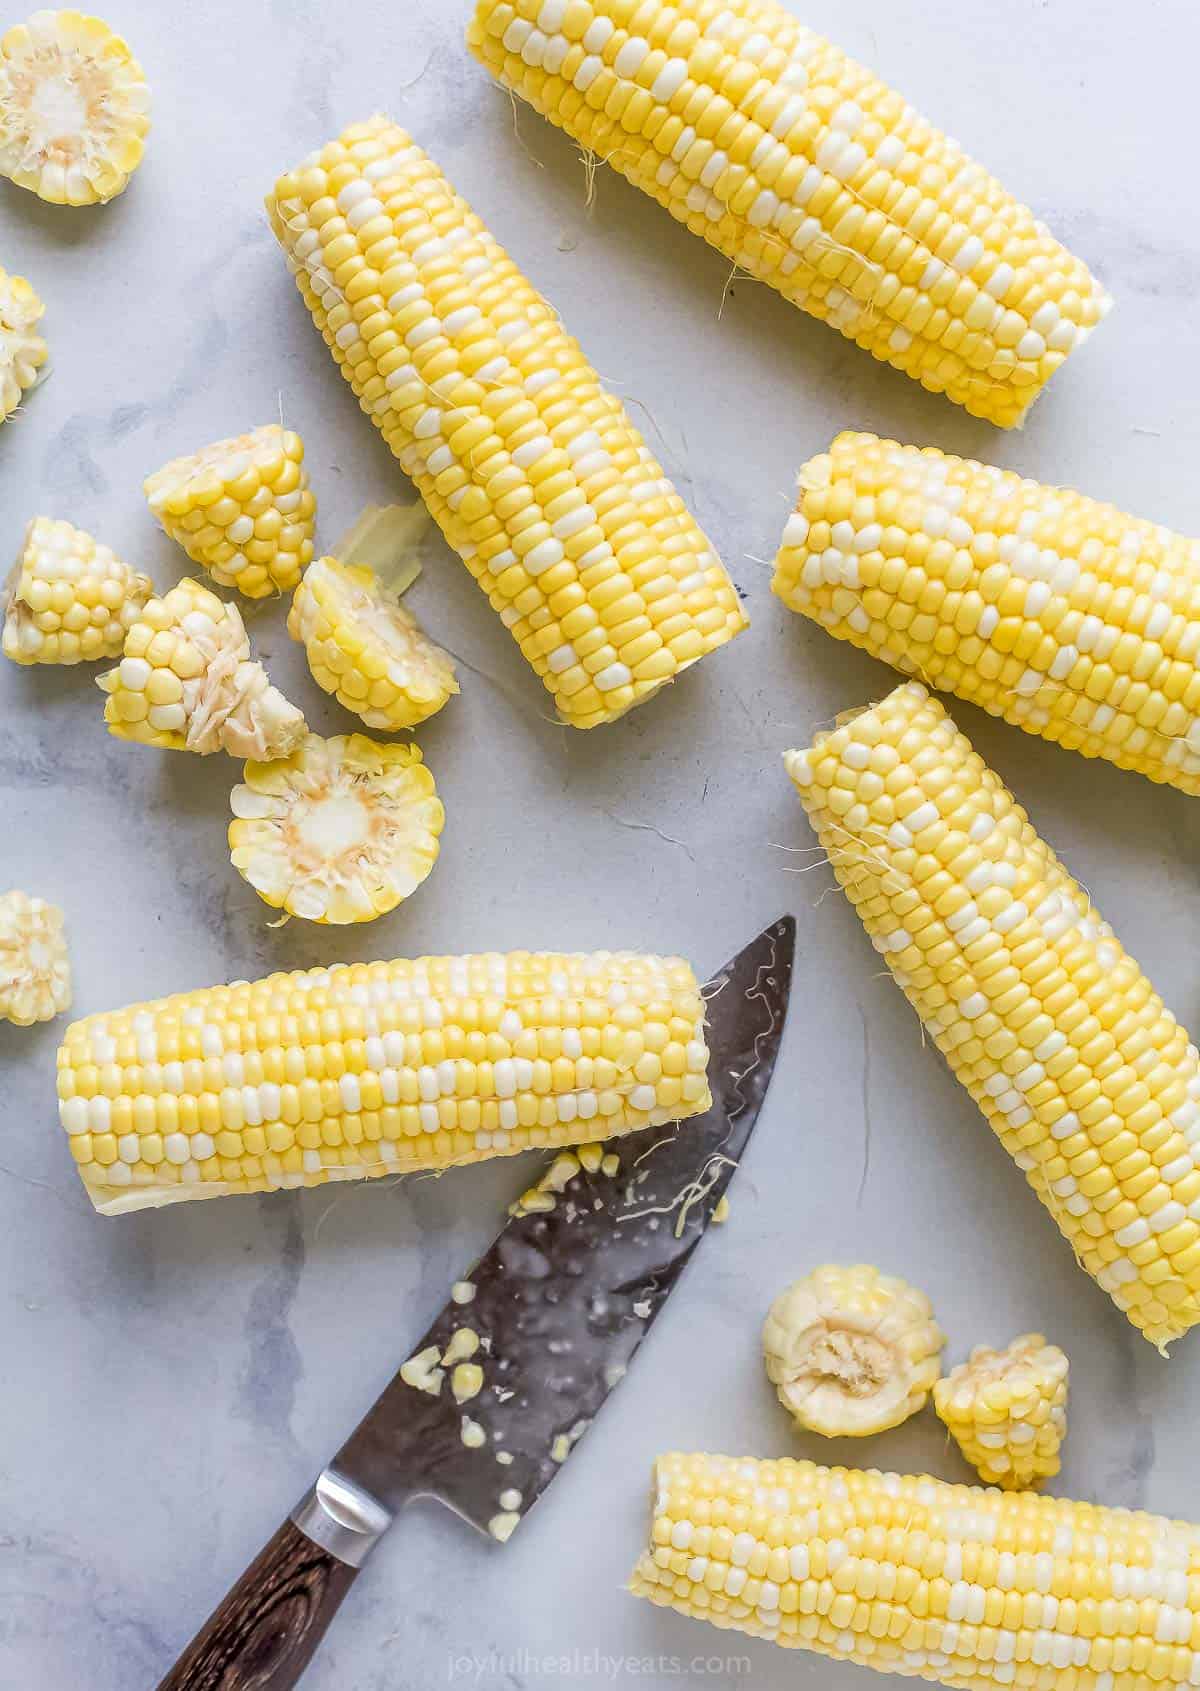 Trimmed corn on the cob on a kitchen countertop with a sharp chef's knife